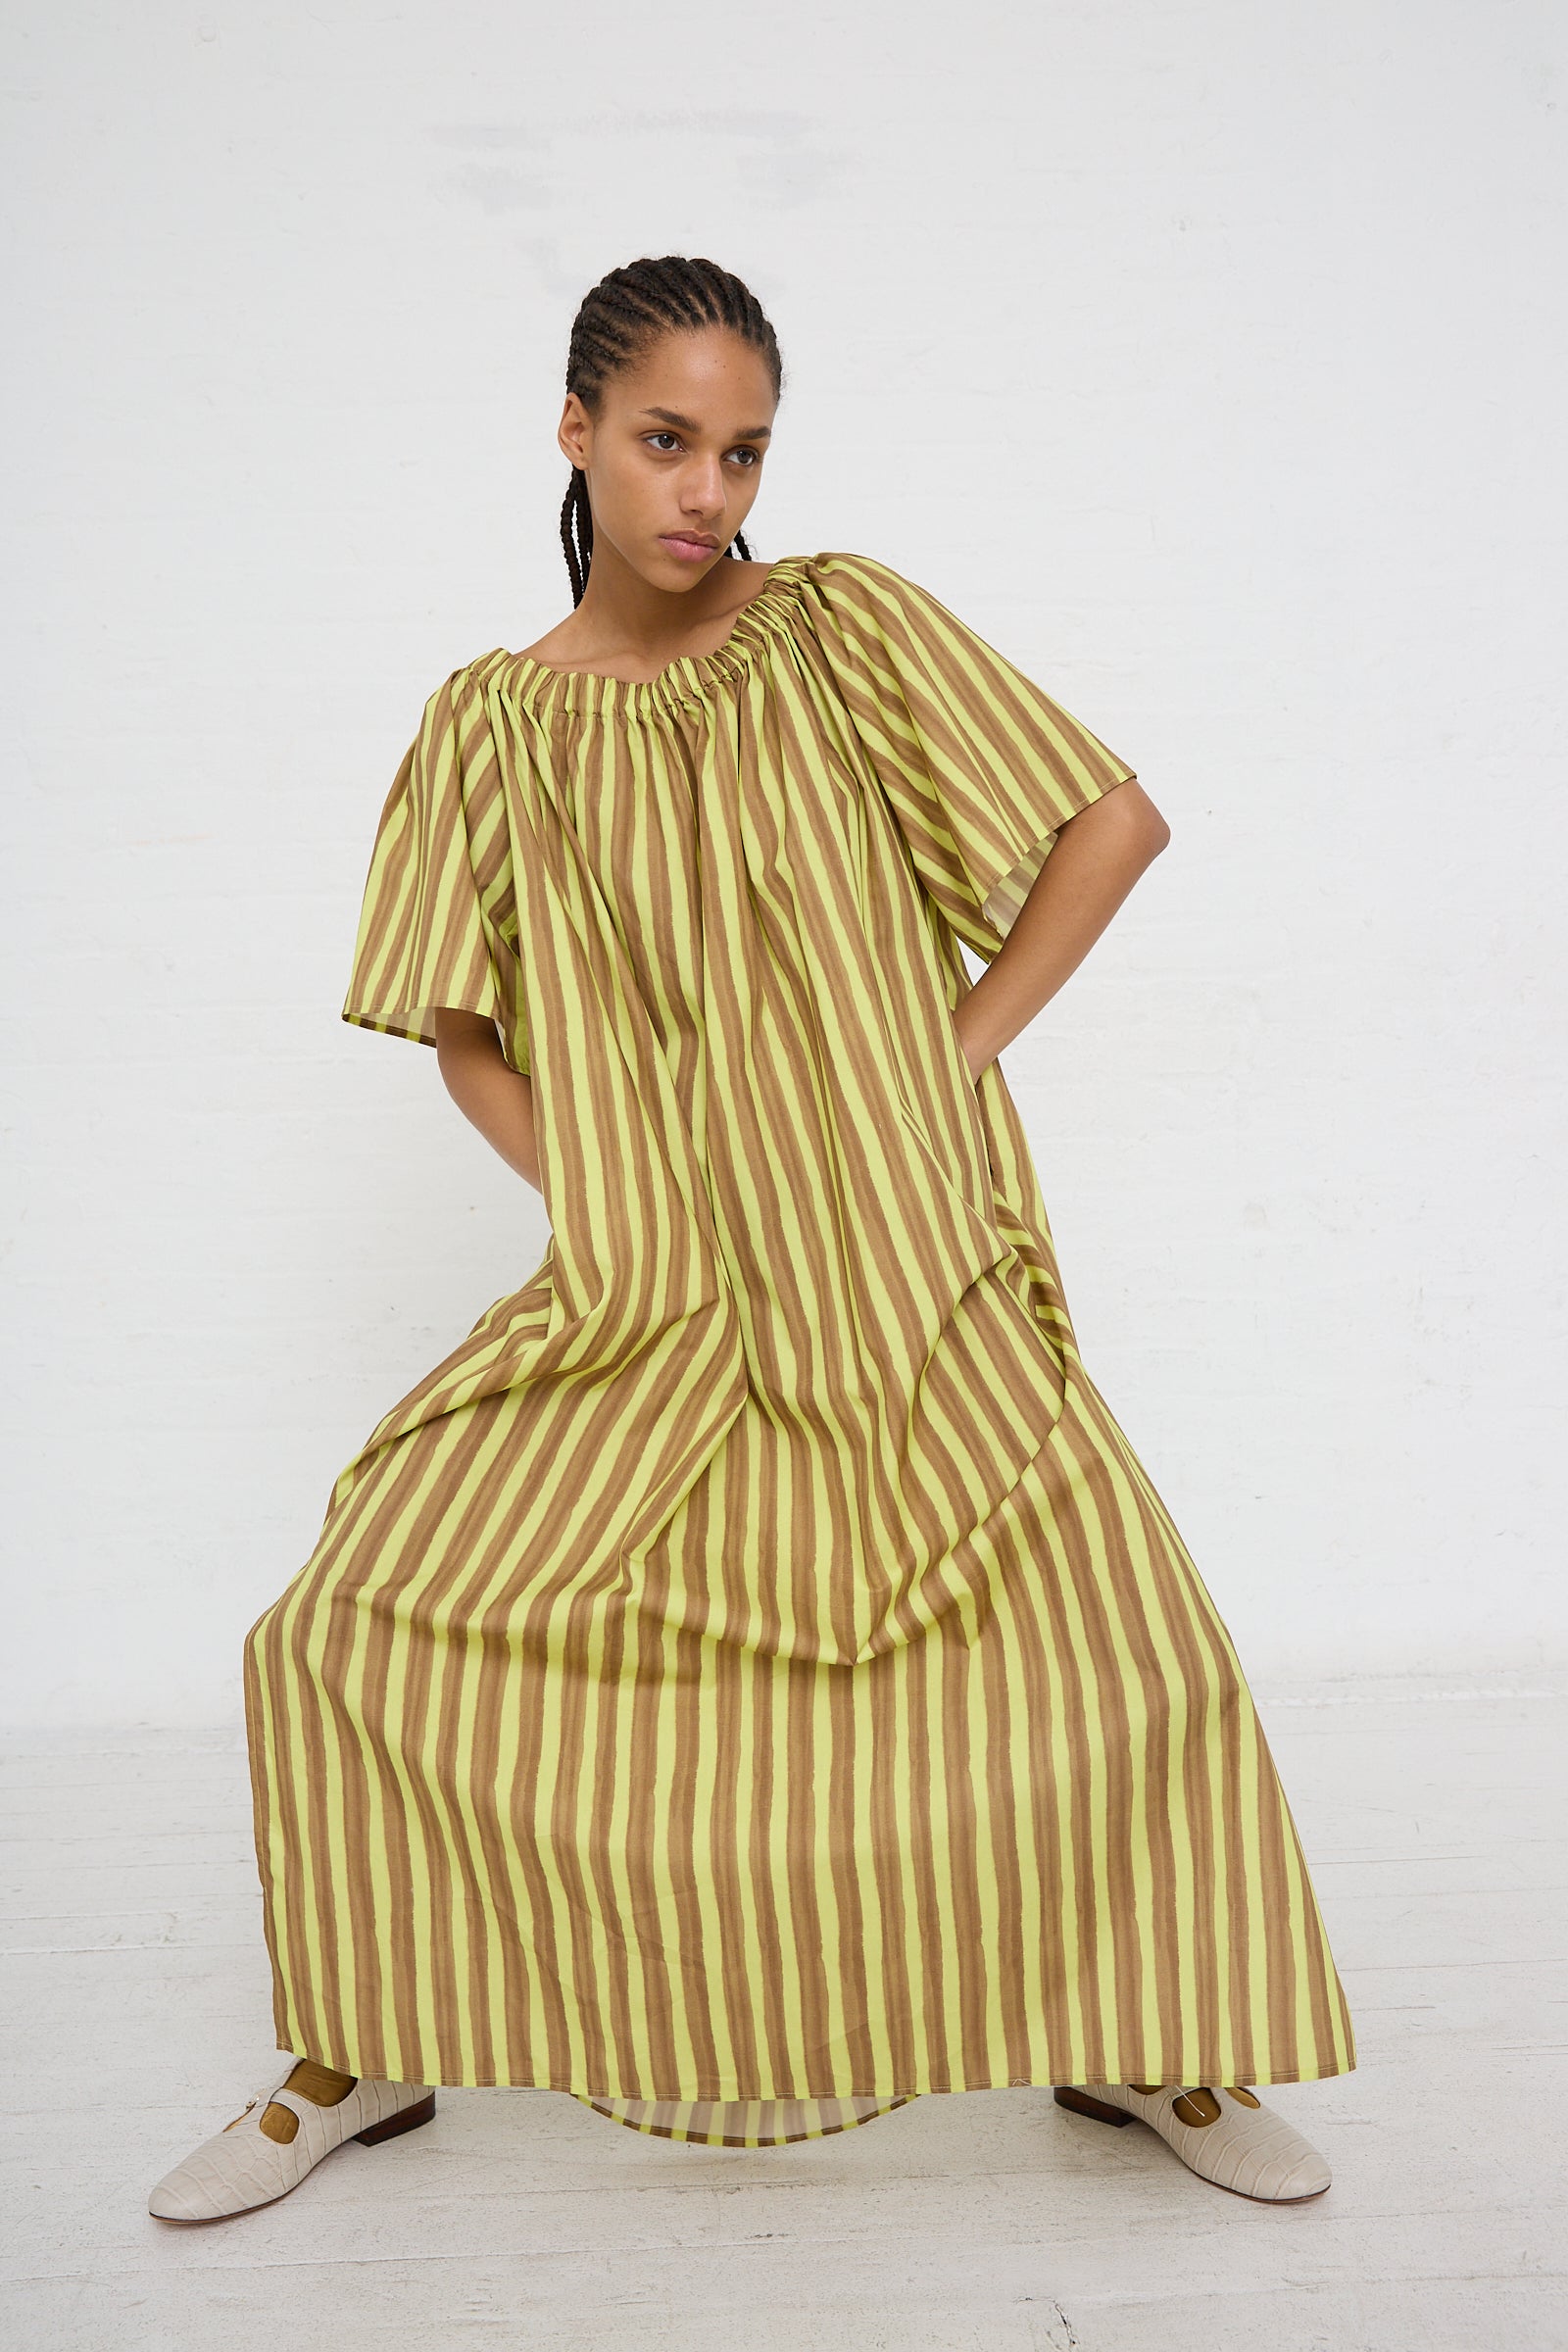 A woman in a AVN striped yellow and green Italian womenswear collection cotton maxi dress with oversized short sleeves posing against a white background.